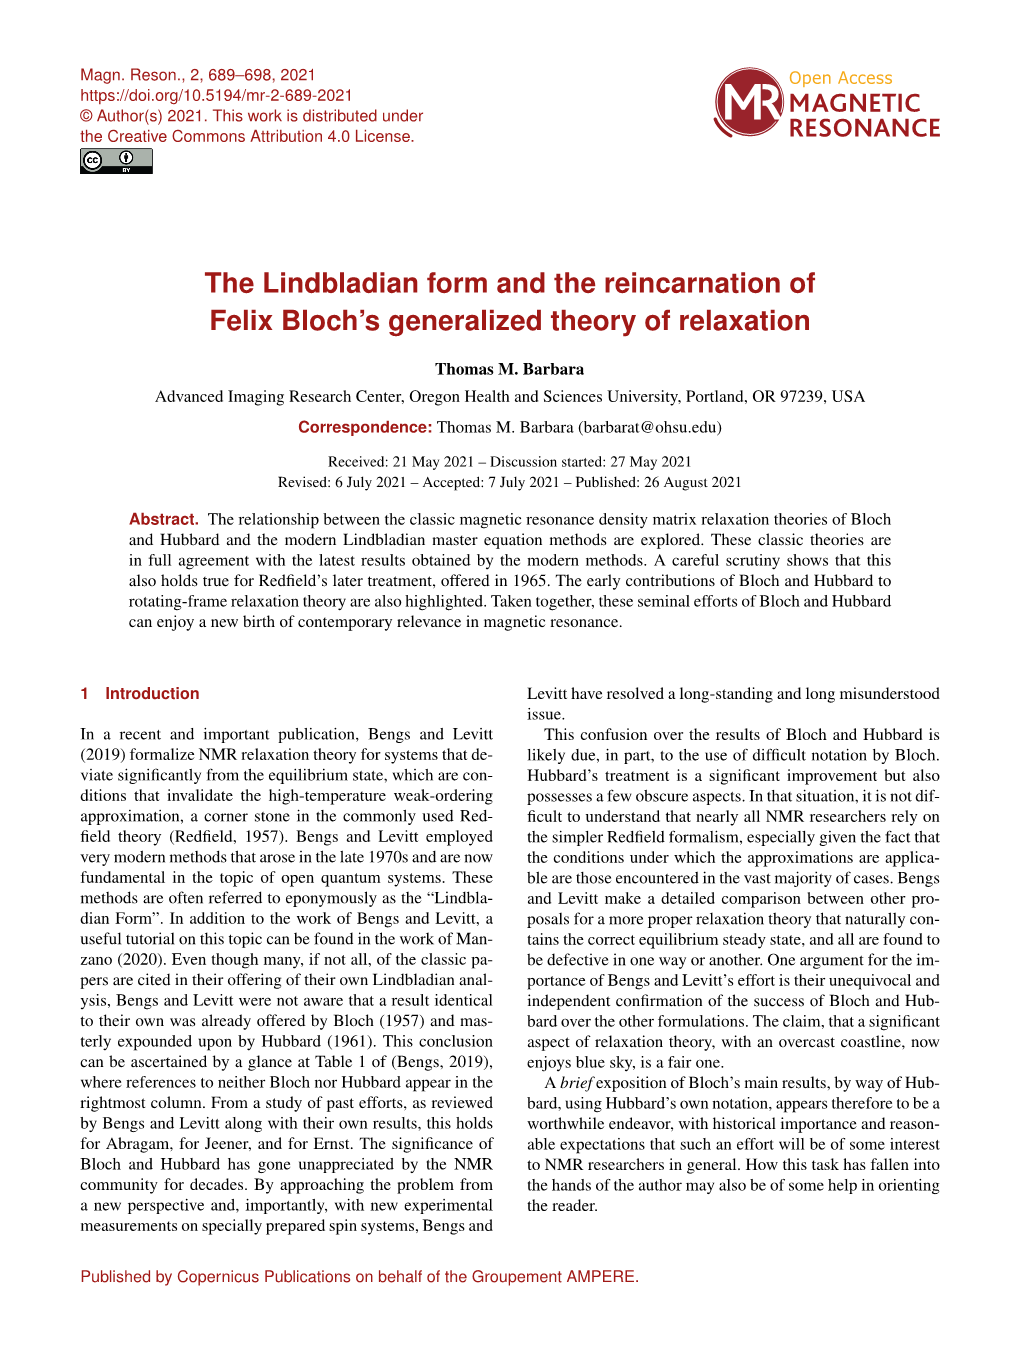 The Lindbladian Form and the Reincarnation of Felix Bloch's